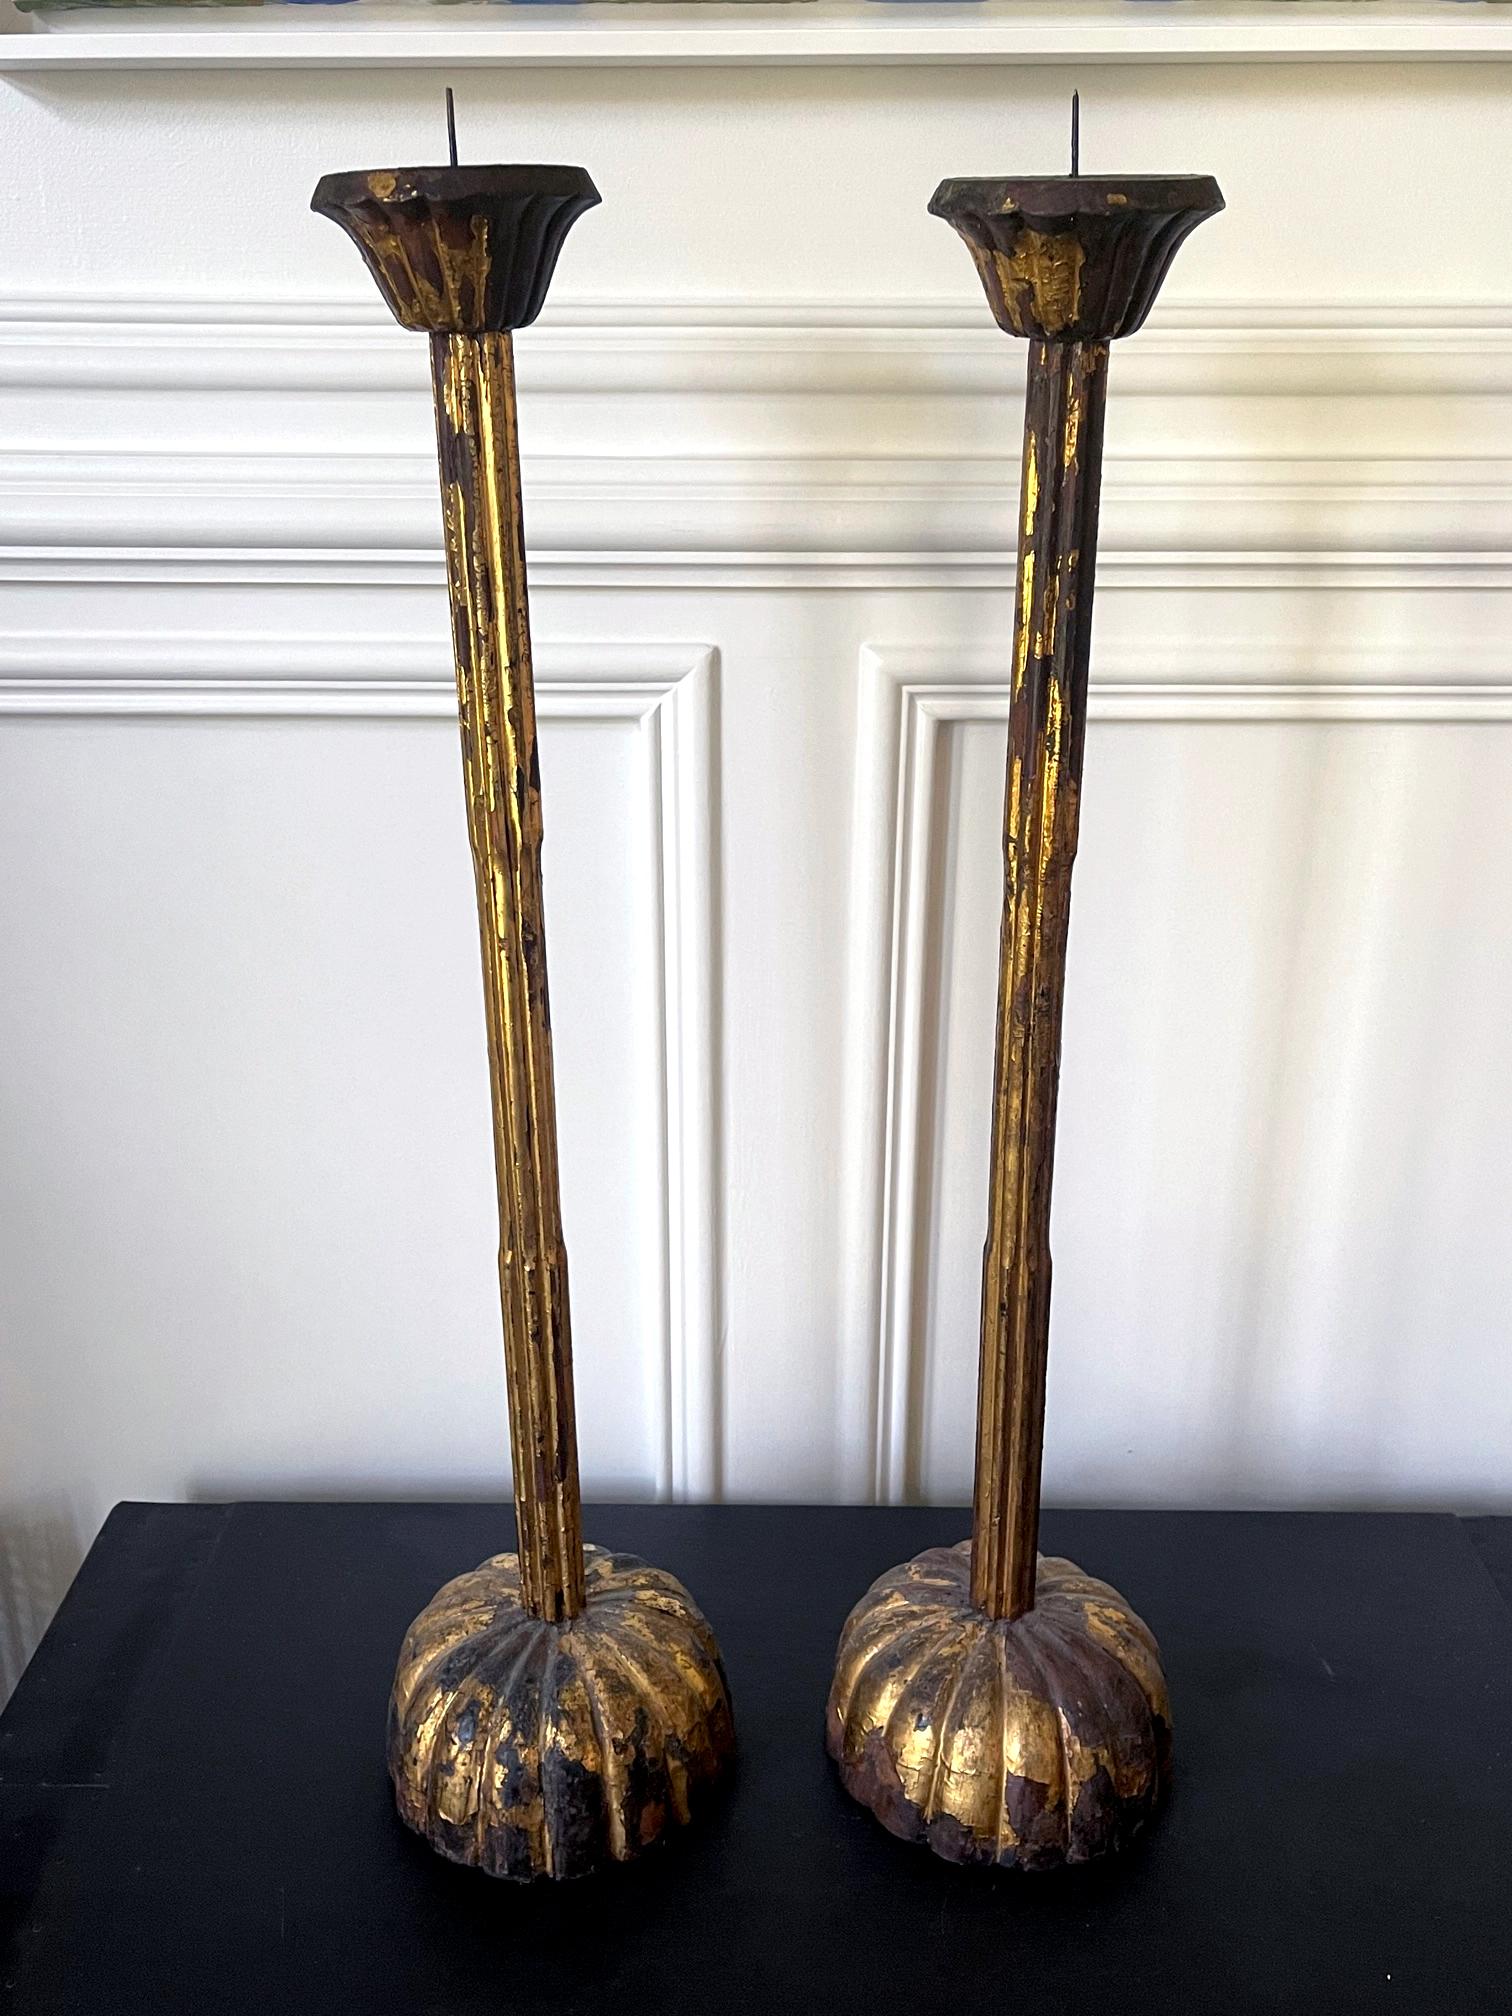 A tall pair of Japanese carved wood candle holders circa early 19th century (late Edo Period). The pair is carved in the typical form with a block base in the shape of stylized chrysanthemums and long fluted stem with changes in diameter that